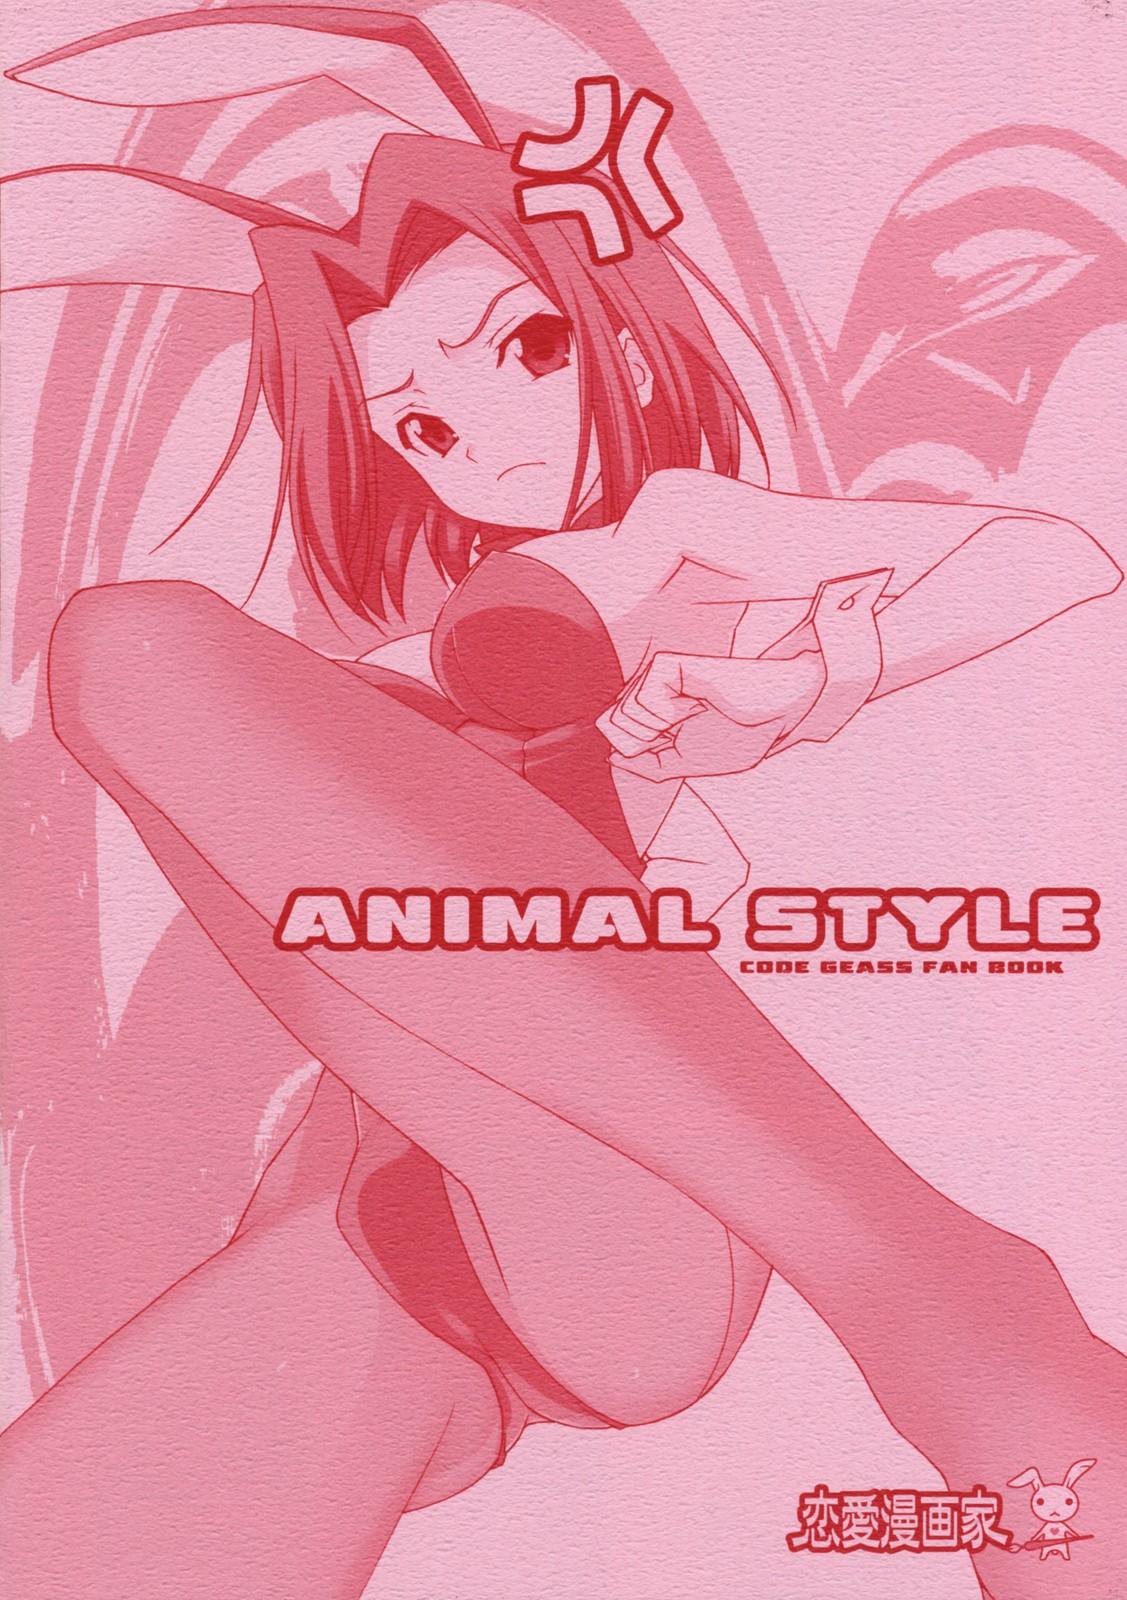 Asian Babes ANIMAL STYLE - Code geass Facebook - Page 12